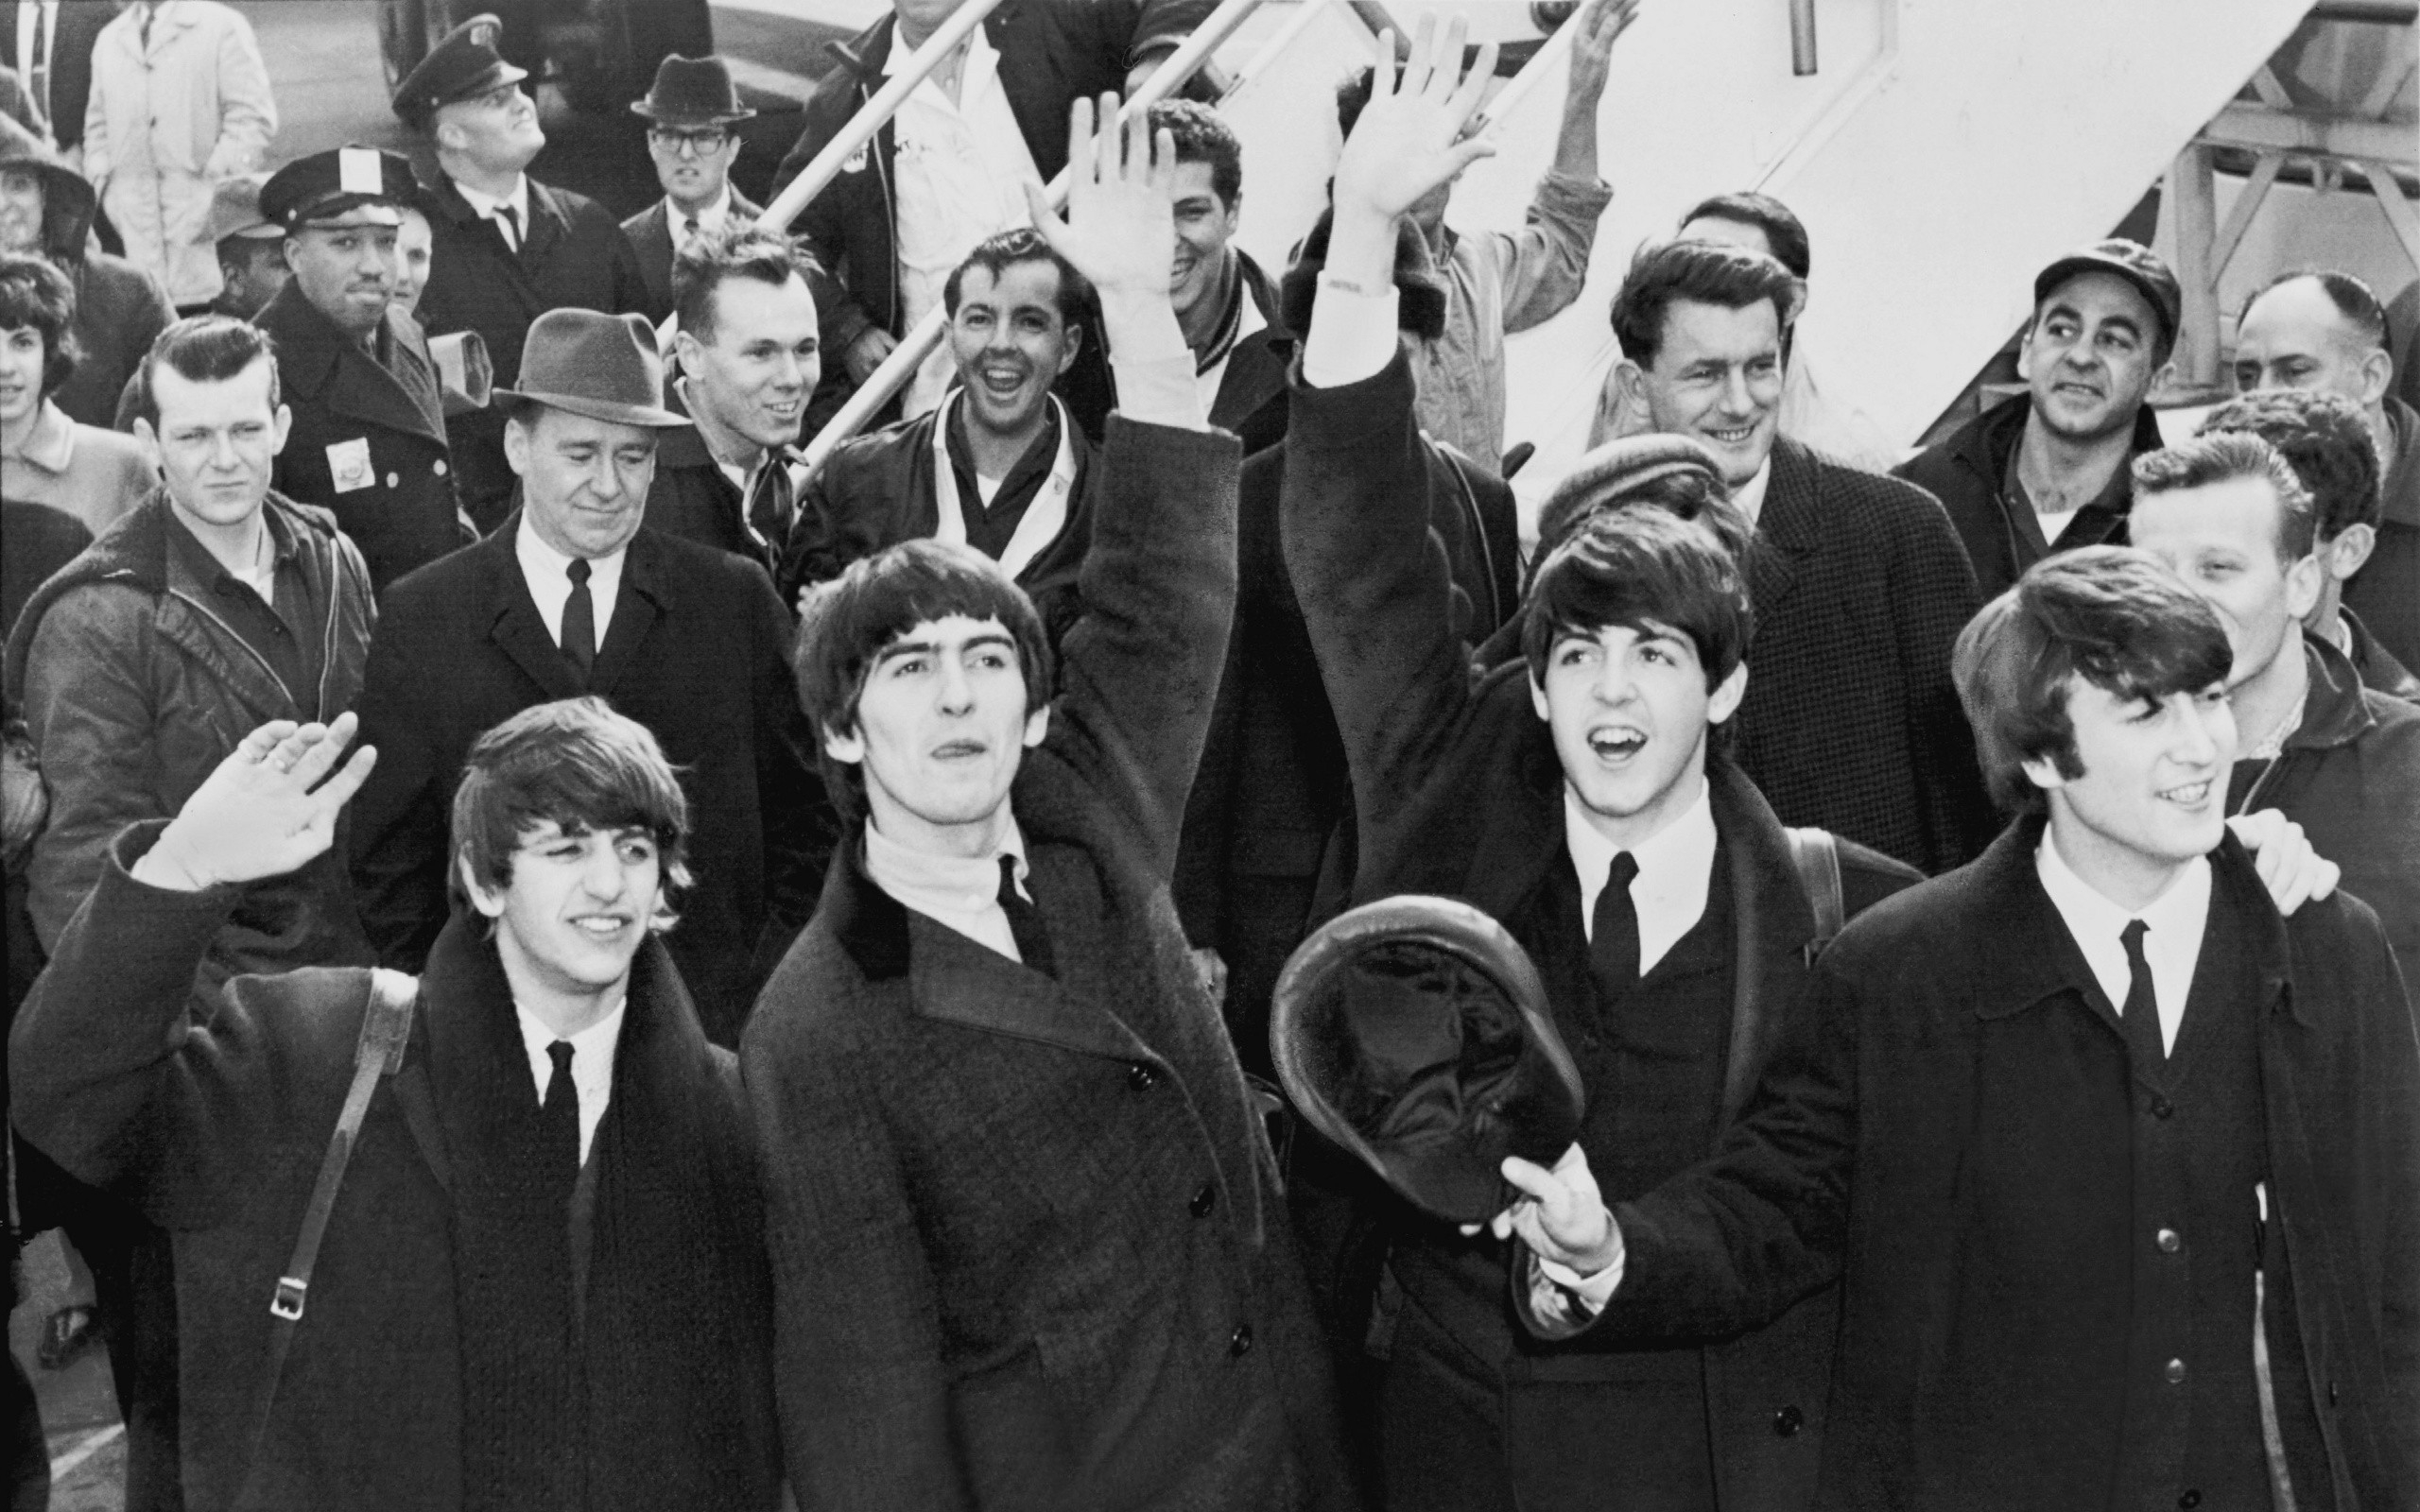 2560x1600 Wallpaper : people, team, musician, The Beatles, Person, Ringo Starr, audience, John Lennon, Paul McCartney, George Harrison, px, black and white, monochrome photography, social group 4kWallpaper 531765 HD Wallpapers